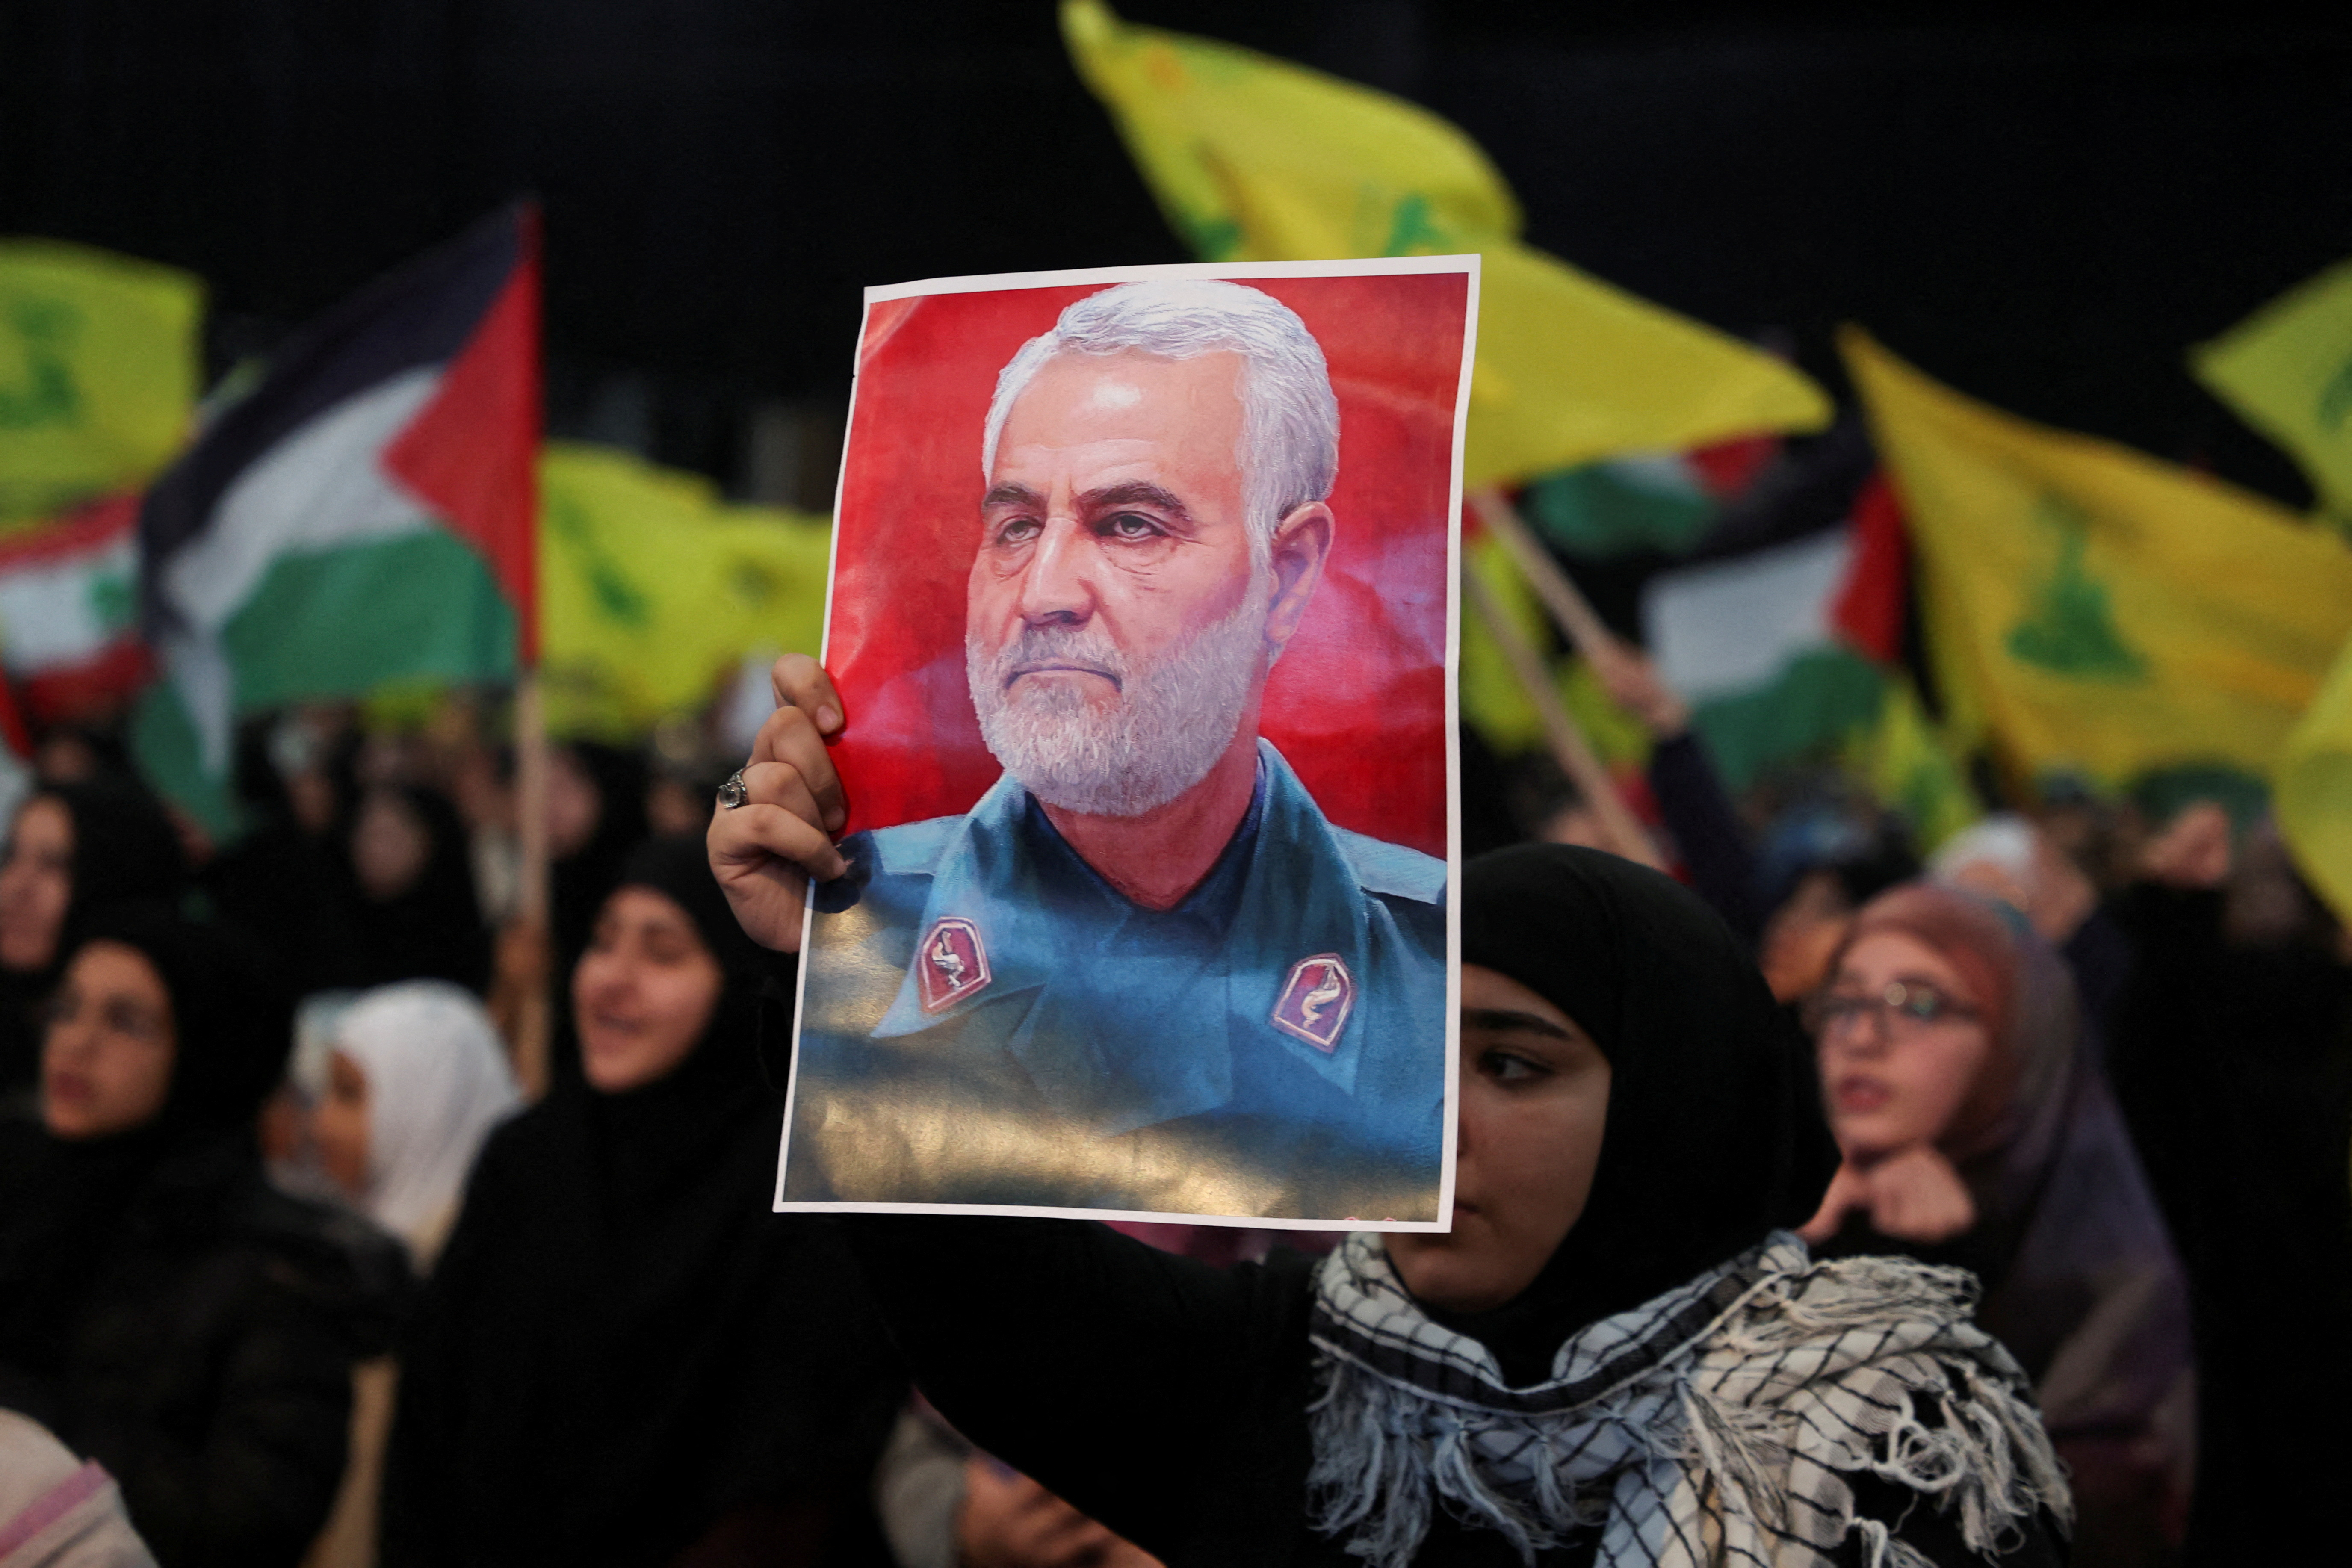 Ceremony to mark the fourth anniversary of the killing of senior Iranian military commander General Qassem Soleimani, in Beirut